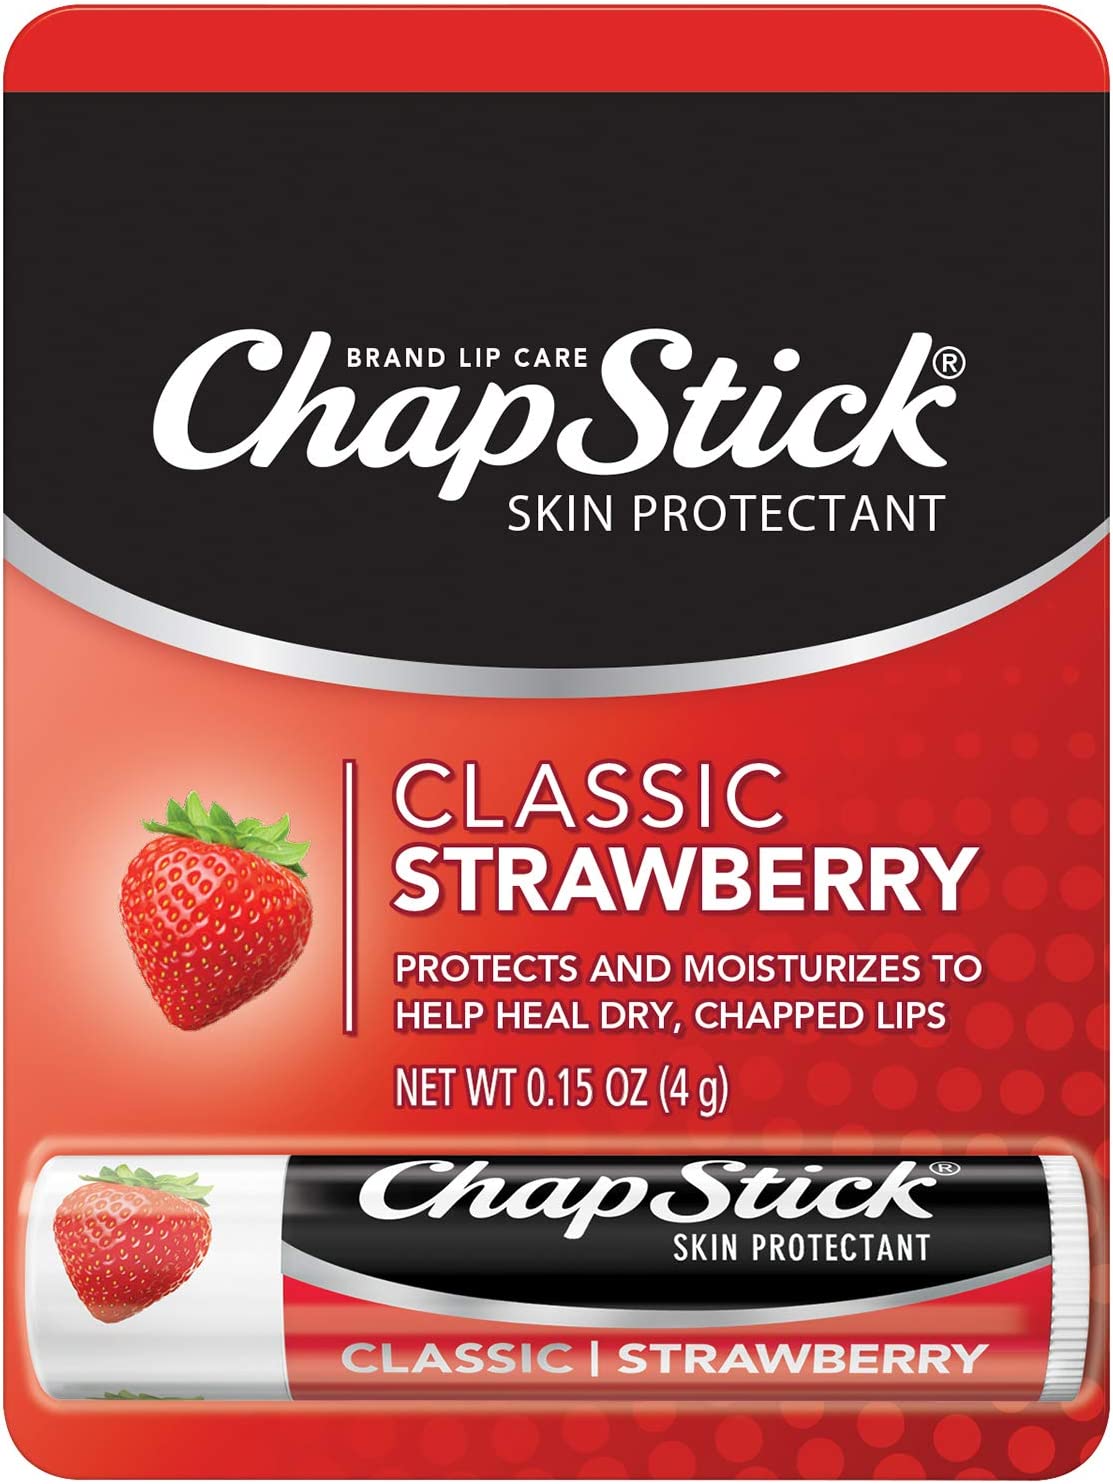 0.15-Oz ChapStick Classic Strawberry Lip Balm Tube $0.96 w/ S&S + Free Shipping w/ Prime or on orders over $25